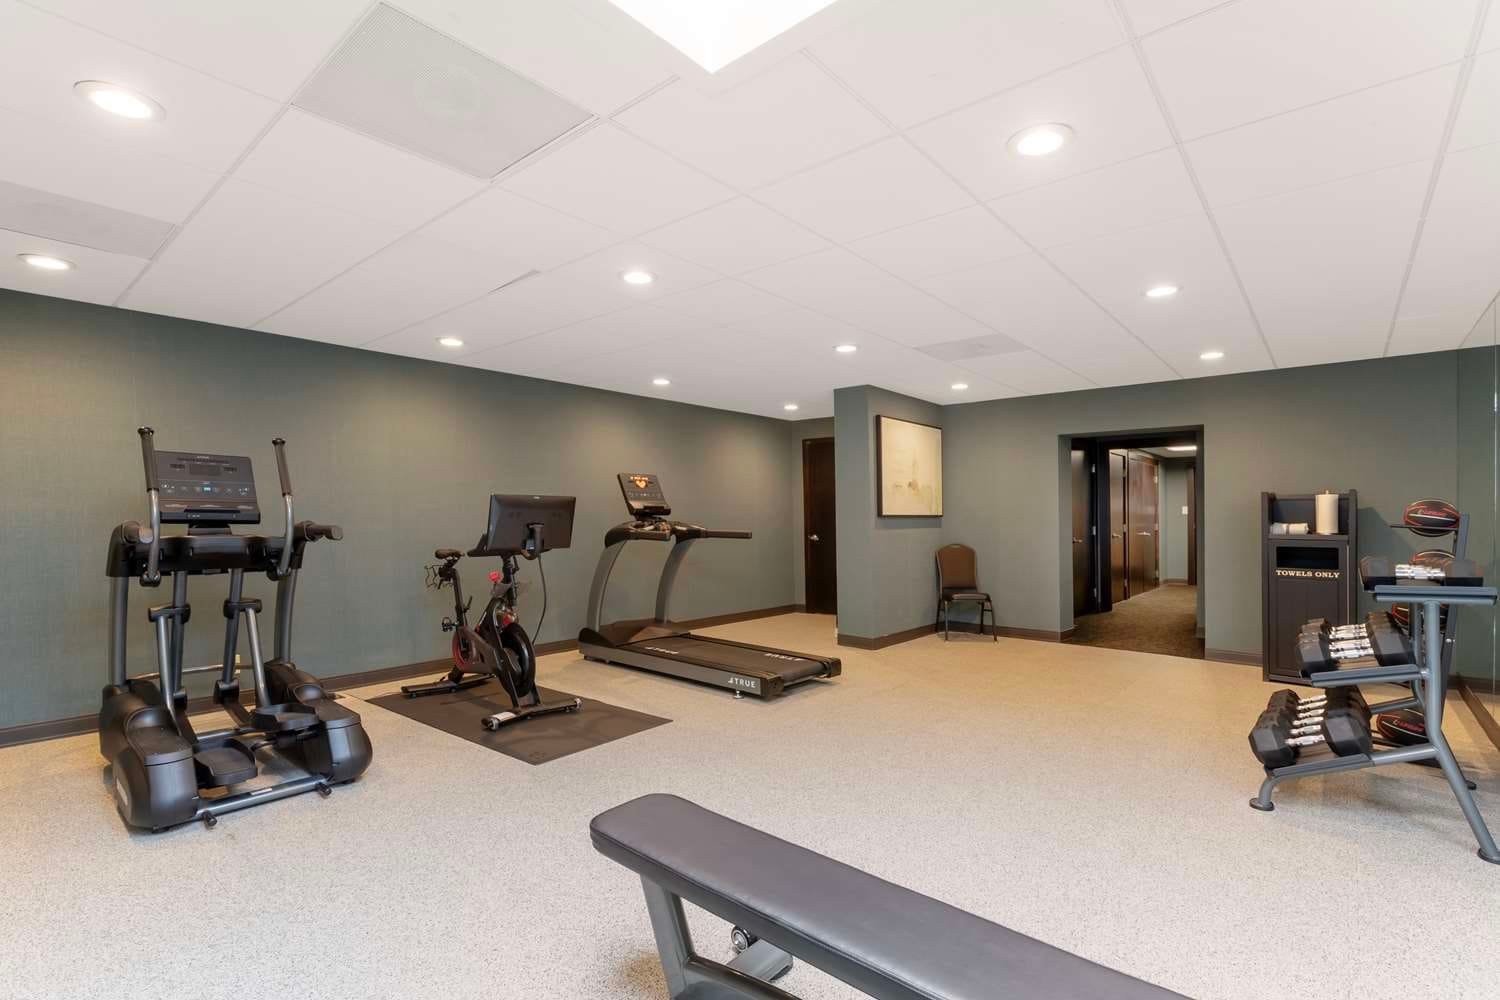 Fitness Center opens immunocompromised room, fitness bubble